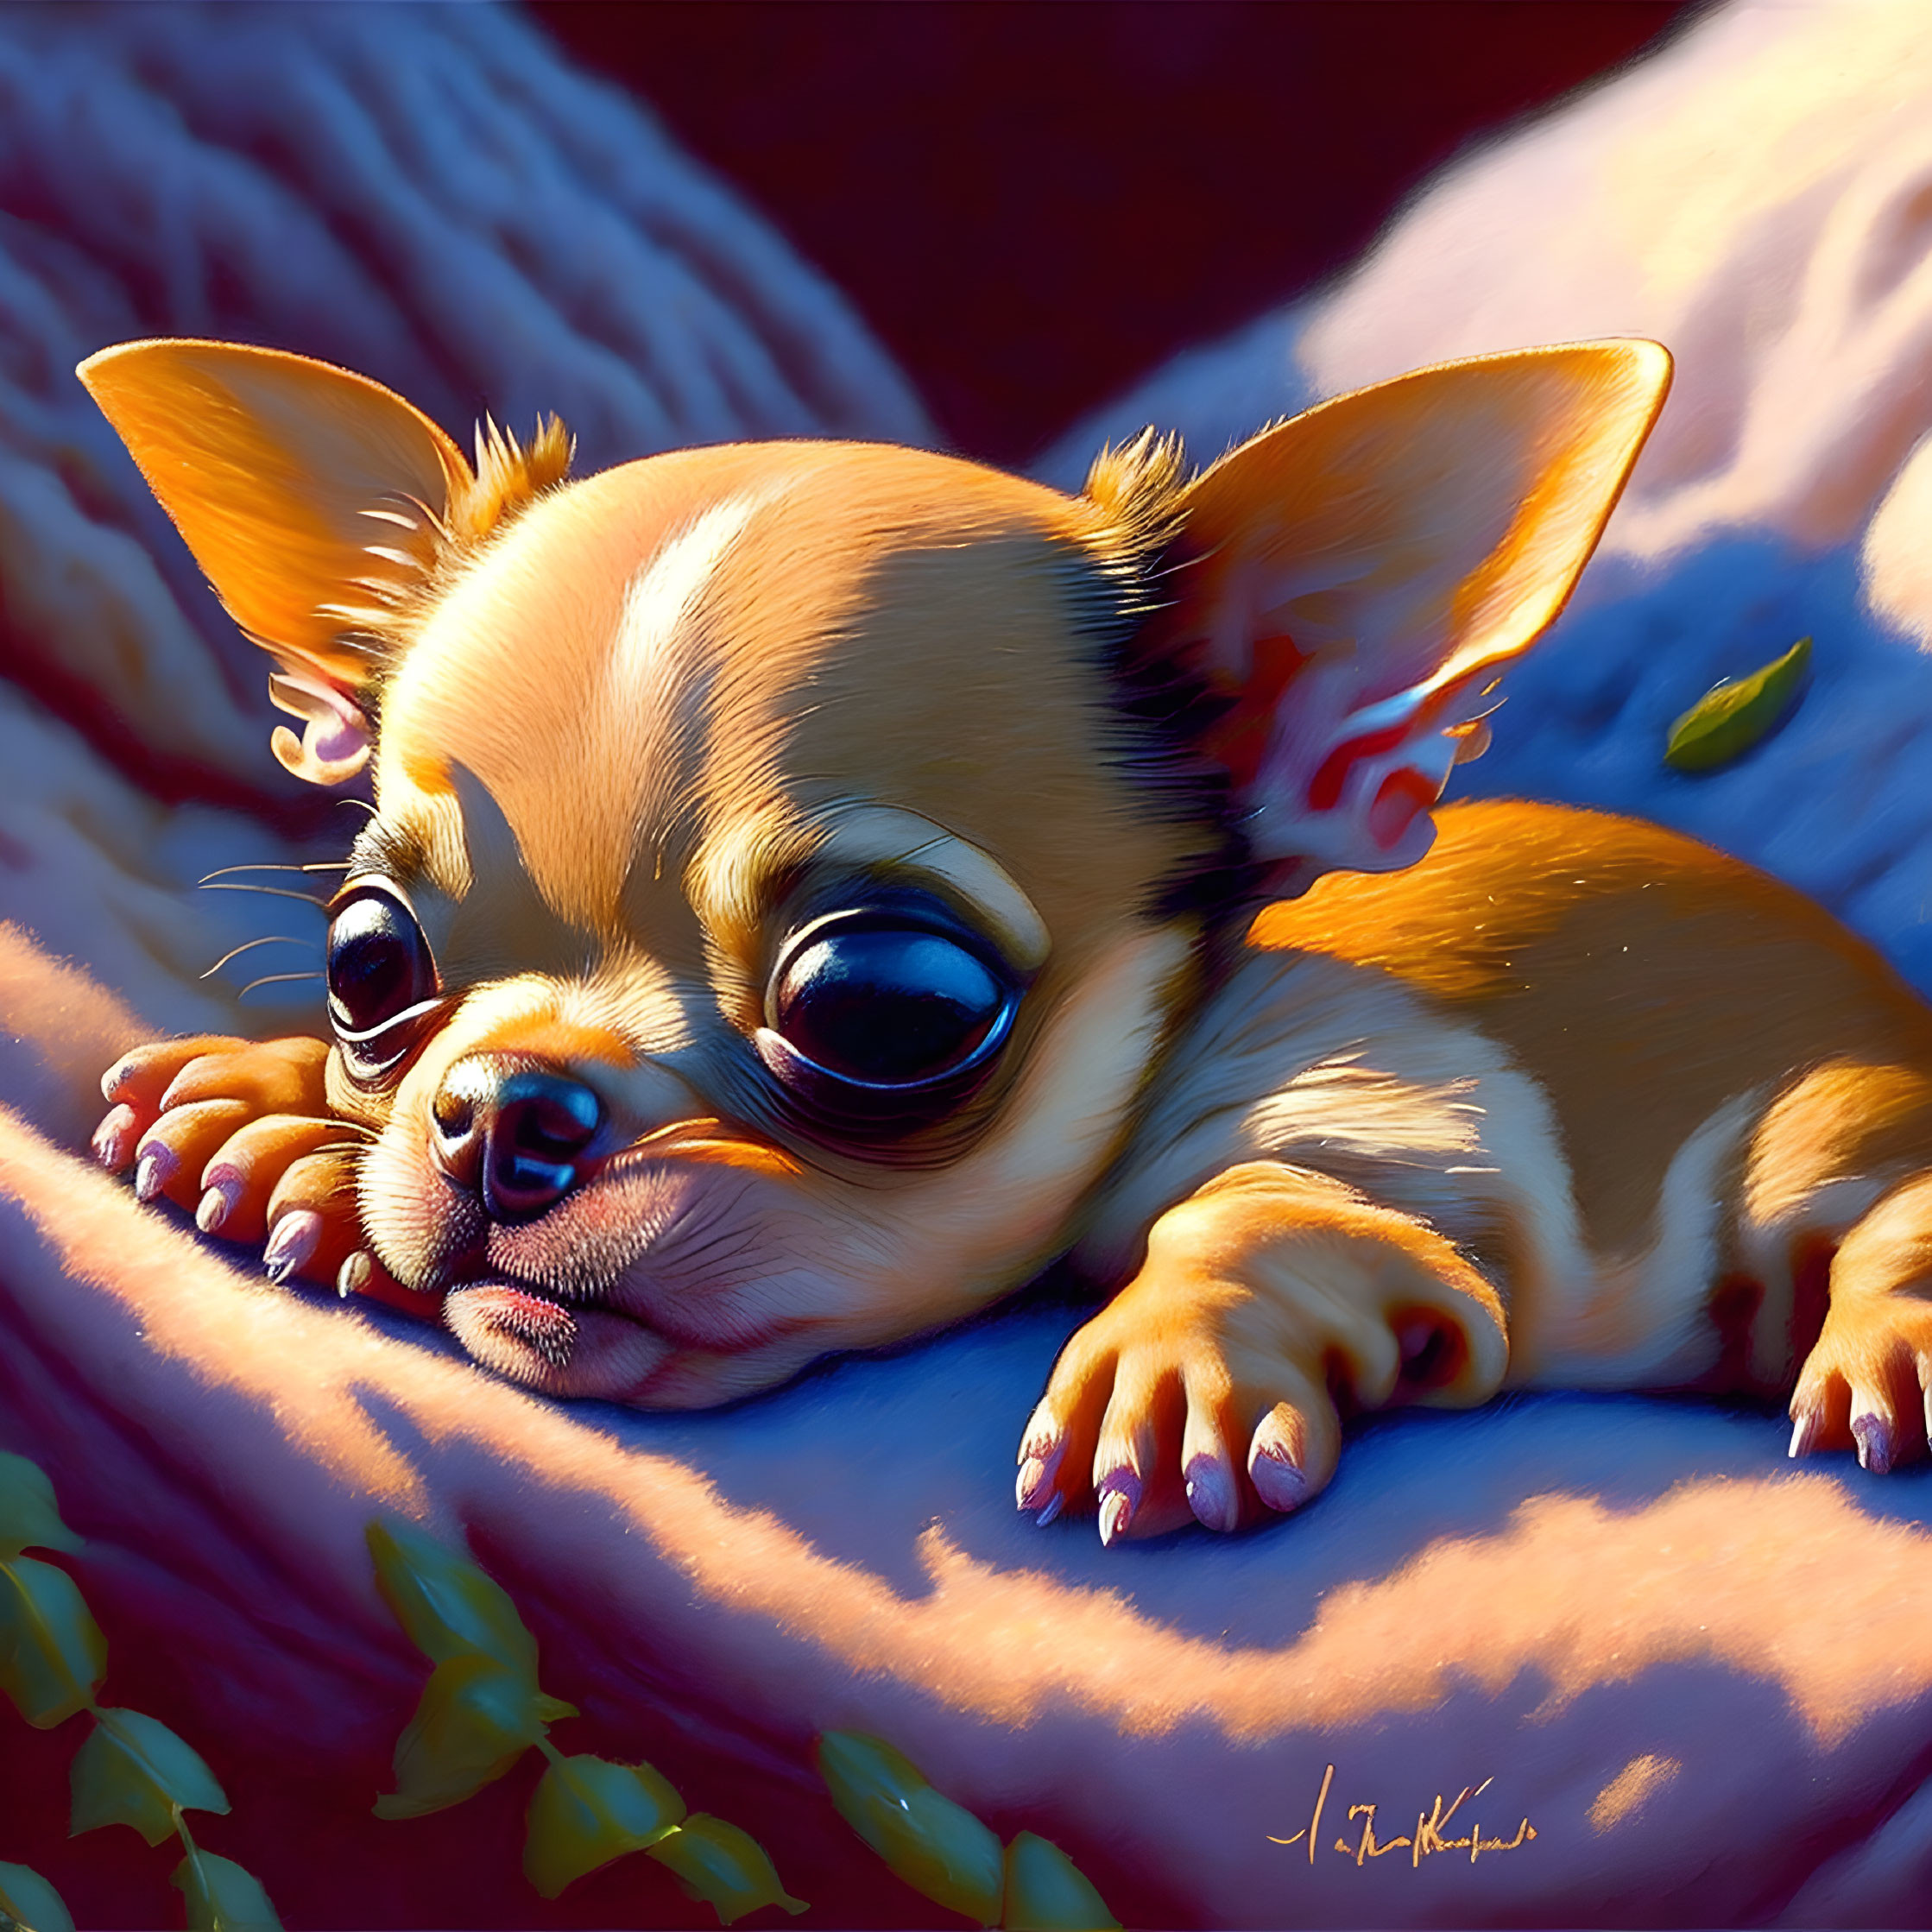 Chihuahua Puppy Illustration: Detailed Fur Texture & Glossy Eyes